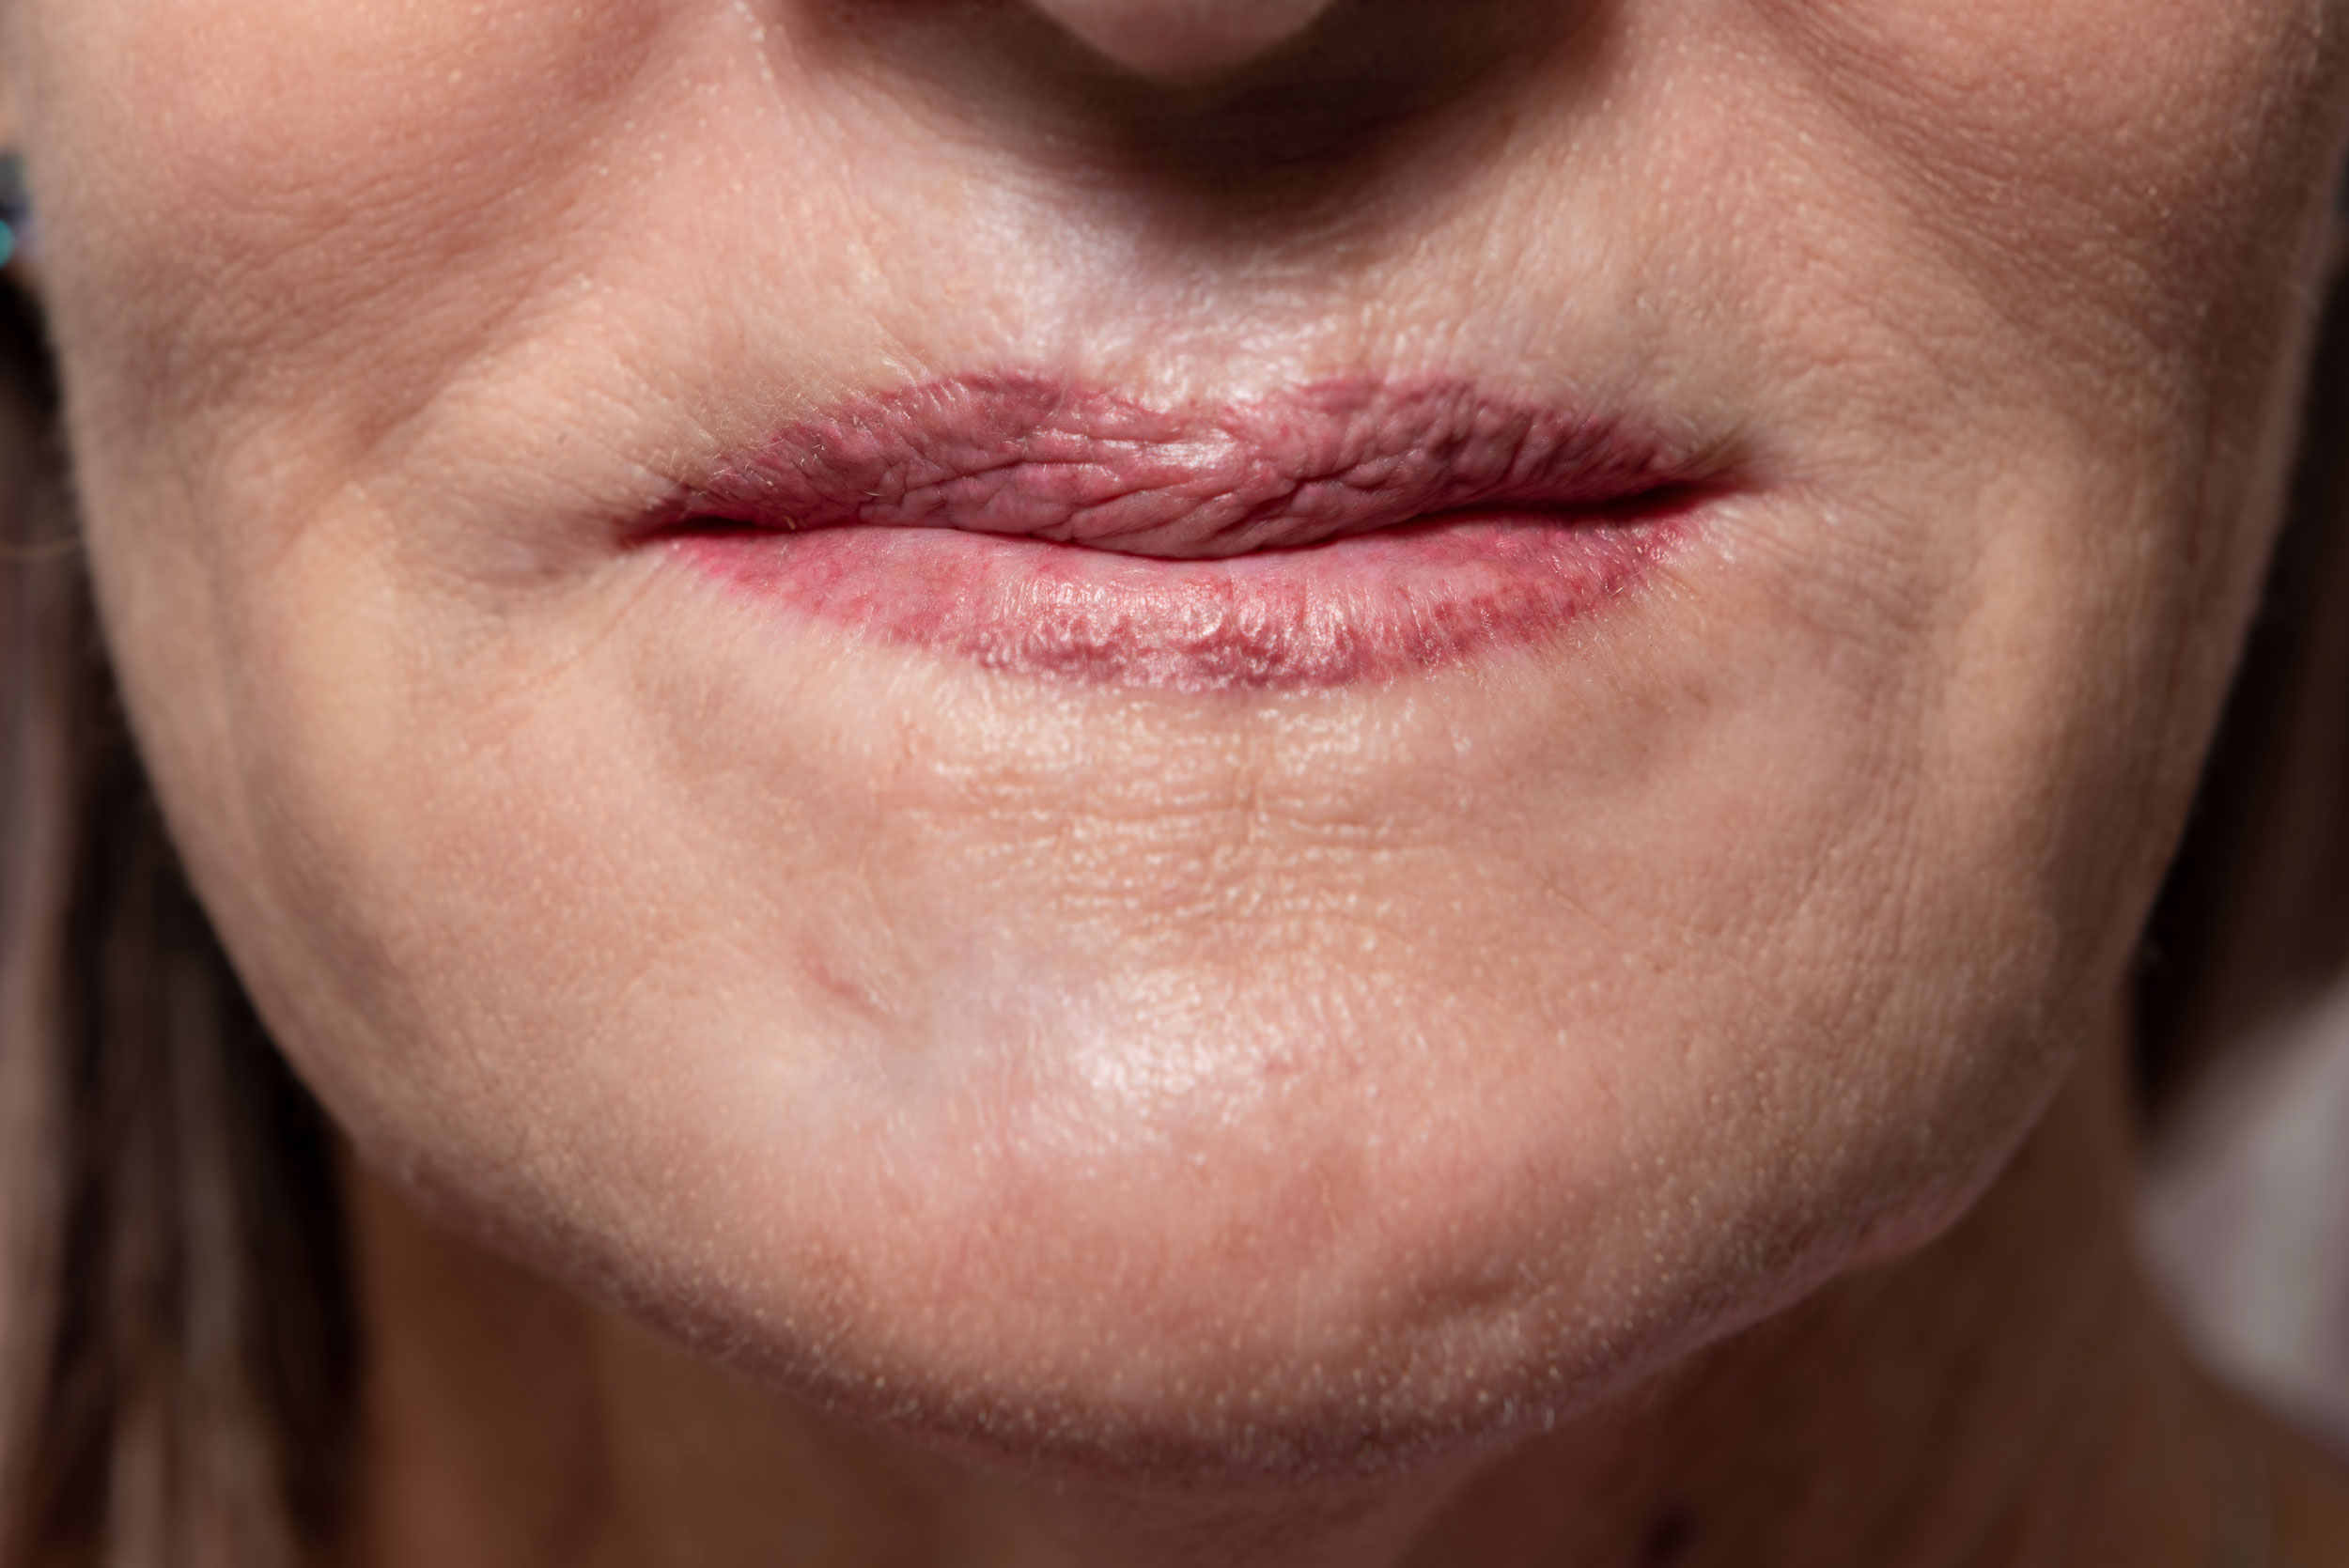 This young woman had several surgeries after a sporting accident caused severe damage to her lower face, especially her lips. The procedure took many applicatons to break through the thick scarring to create these pretty new lips. Perseverance and multiple treatments over 6 months to a year are necessary to minimze facial scarring. The face and scalp react better than the rest of the body due to the thickness, moisture and oil from the neck up.